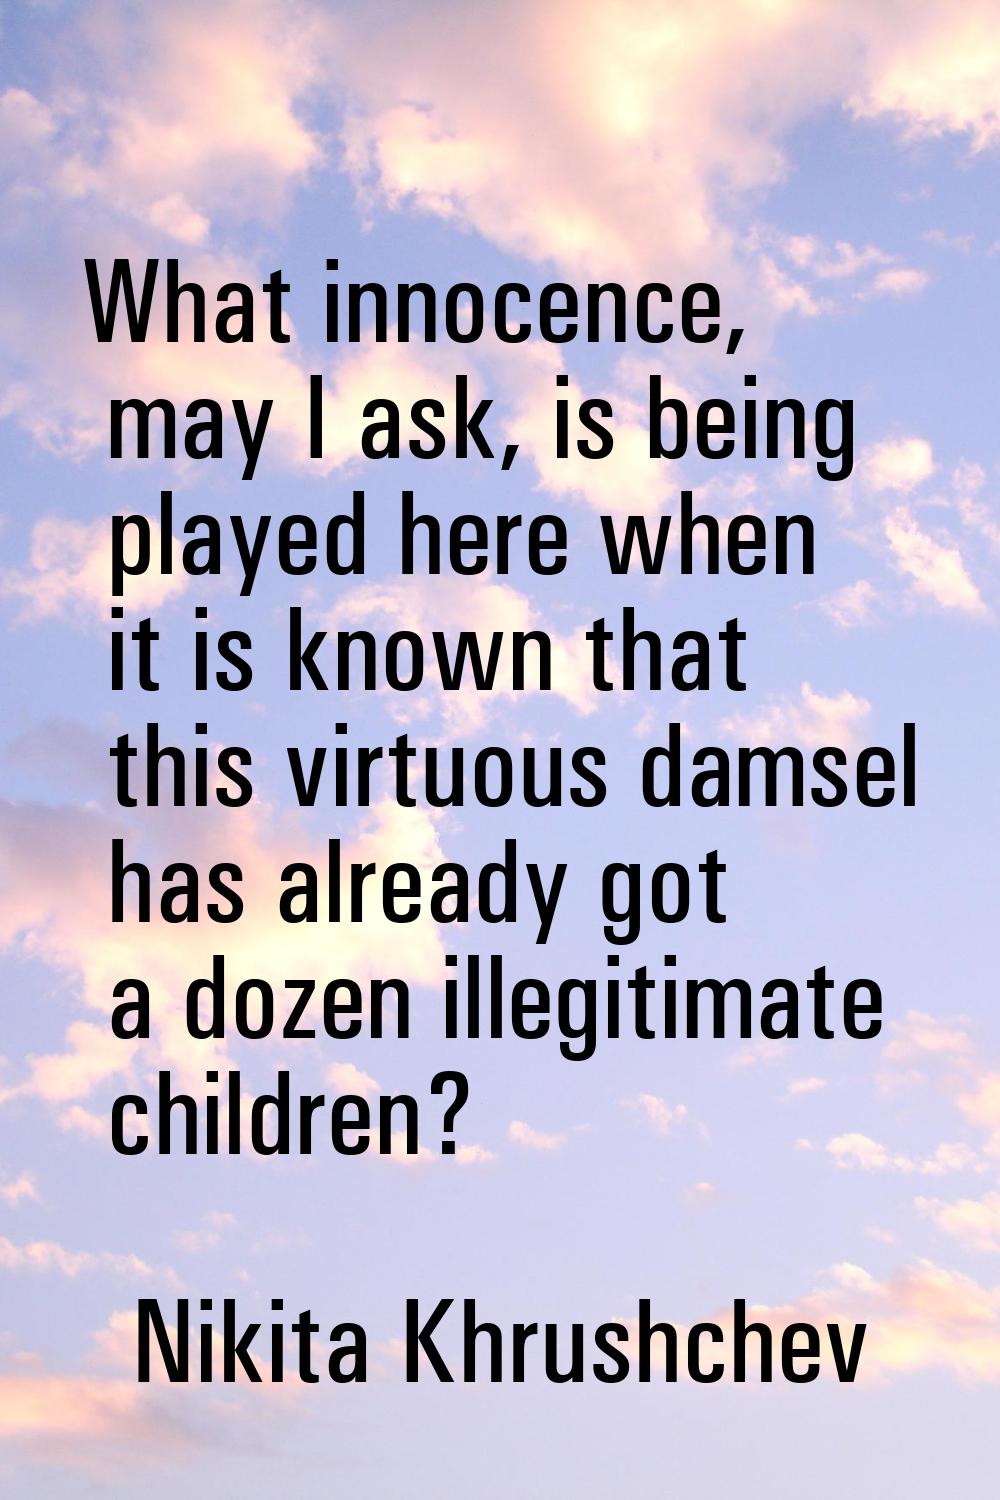 What innocence, may I ask, is being played here when it is known that this virtuous damsel has alre